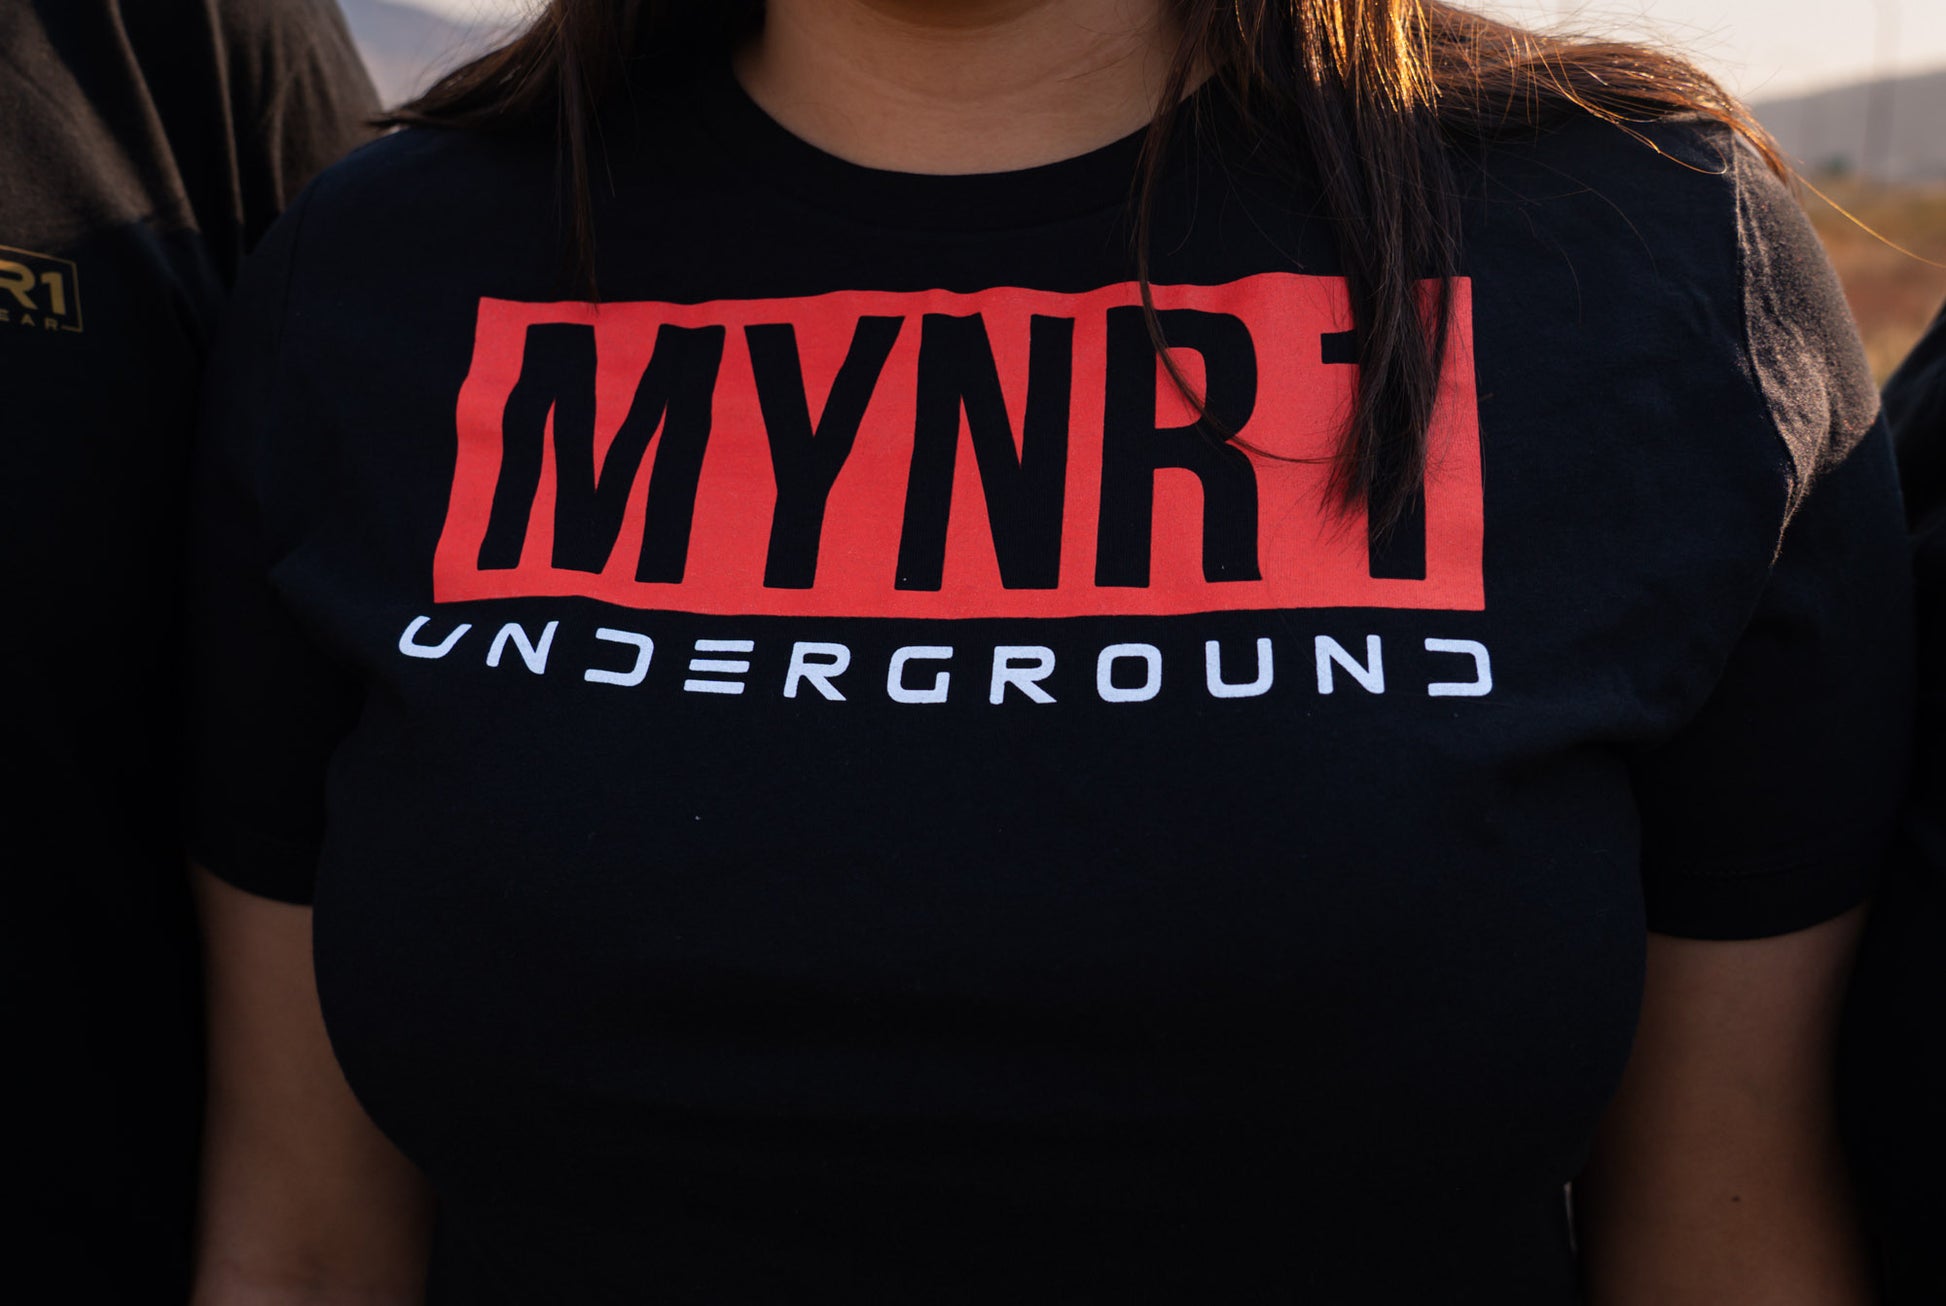 Black MYNR1 Underground with red and white text.  Unisex crewneck made from 100% Cotton and combined and ring-spun cotton.  Machine wash cold, wash inside out.  Comes in XS-XXXL